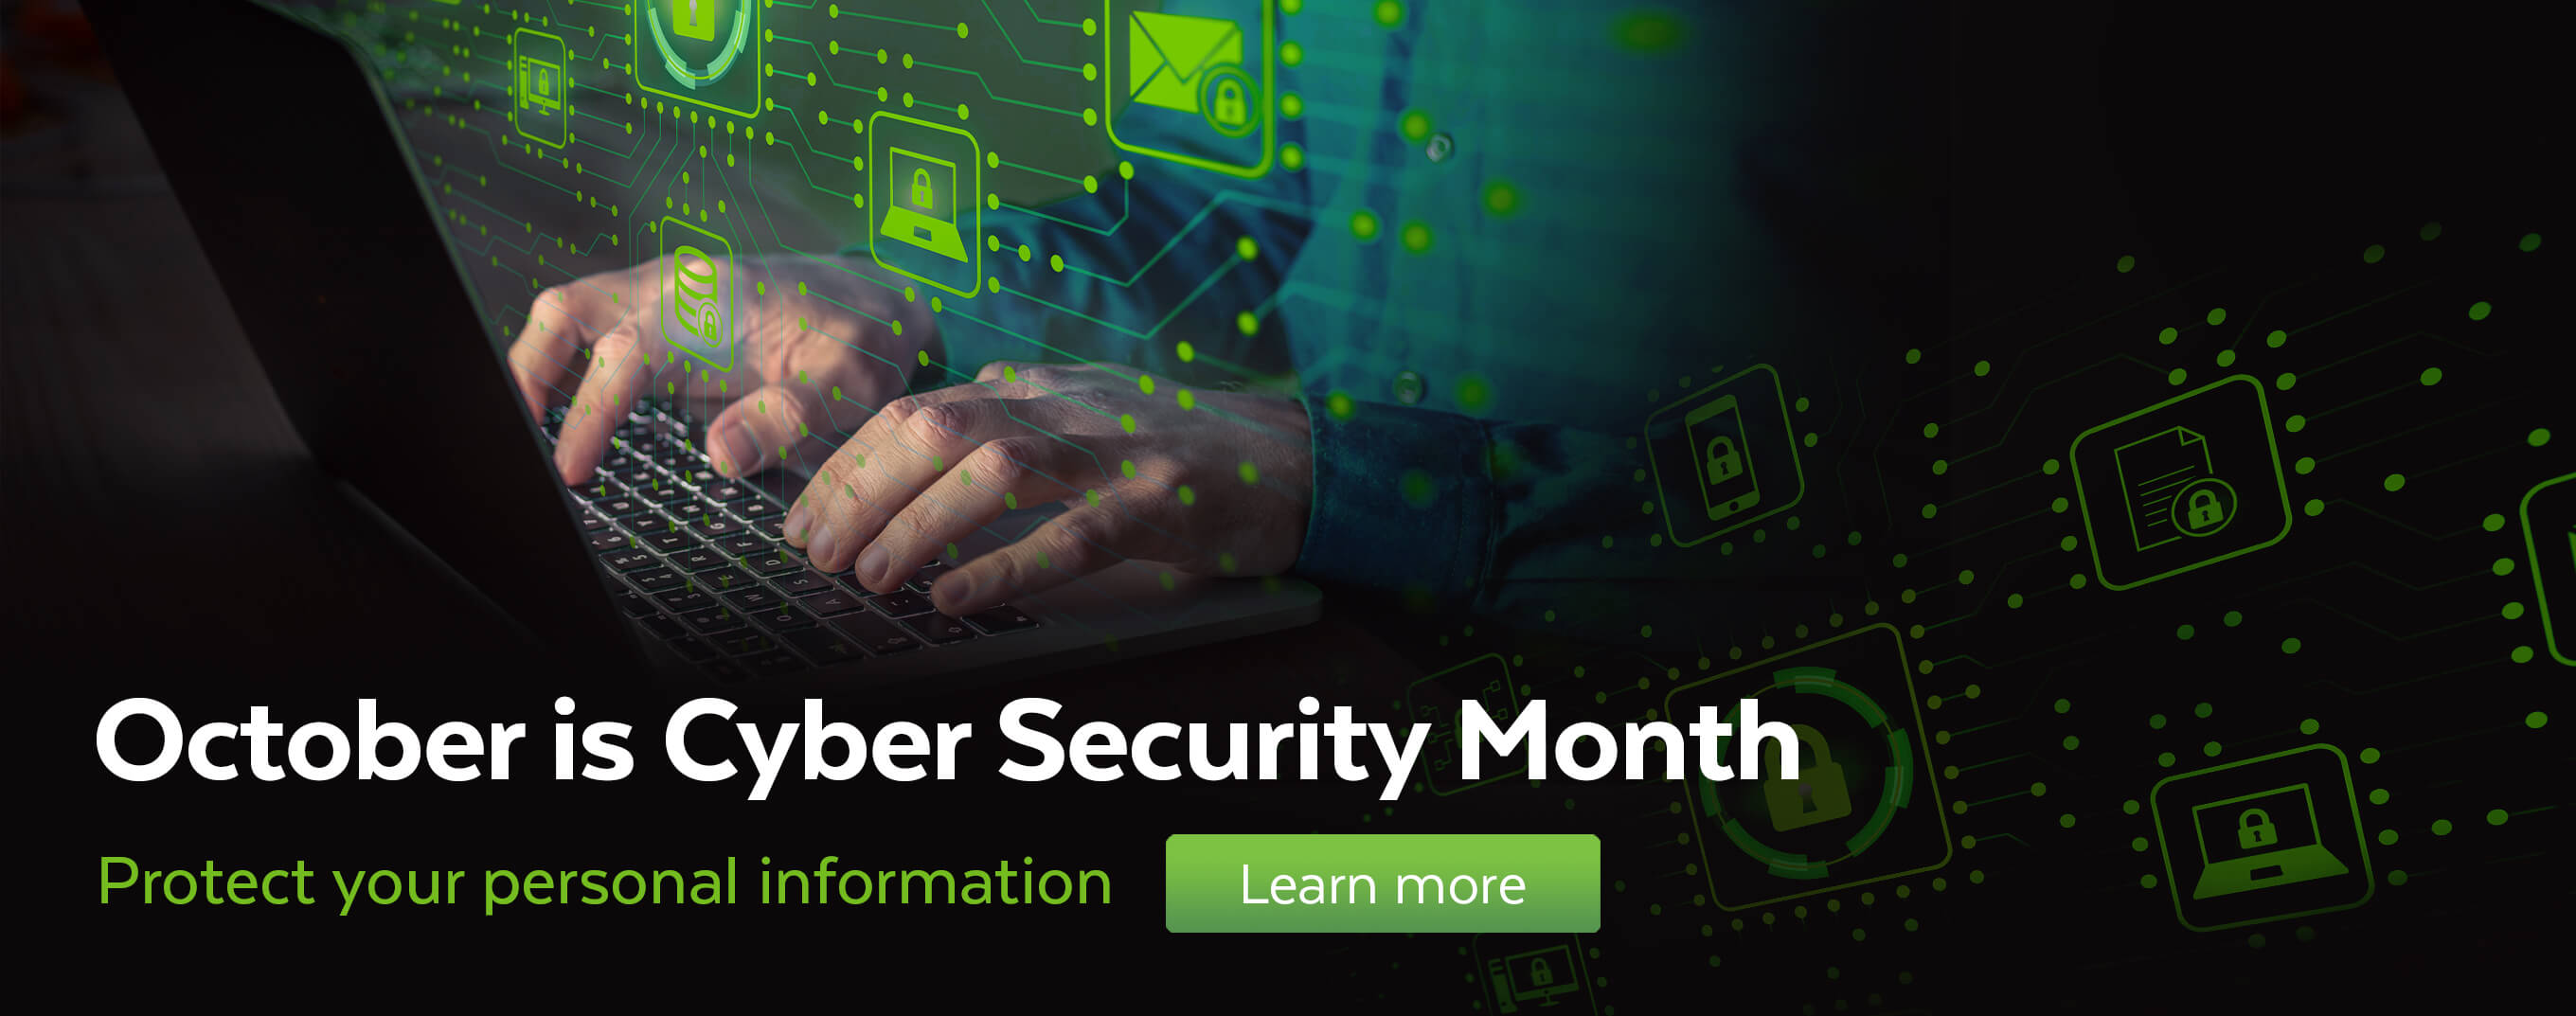 October Cyber Security Month - Protect your personal information